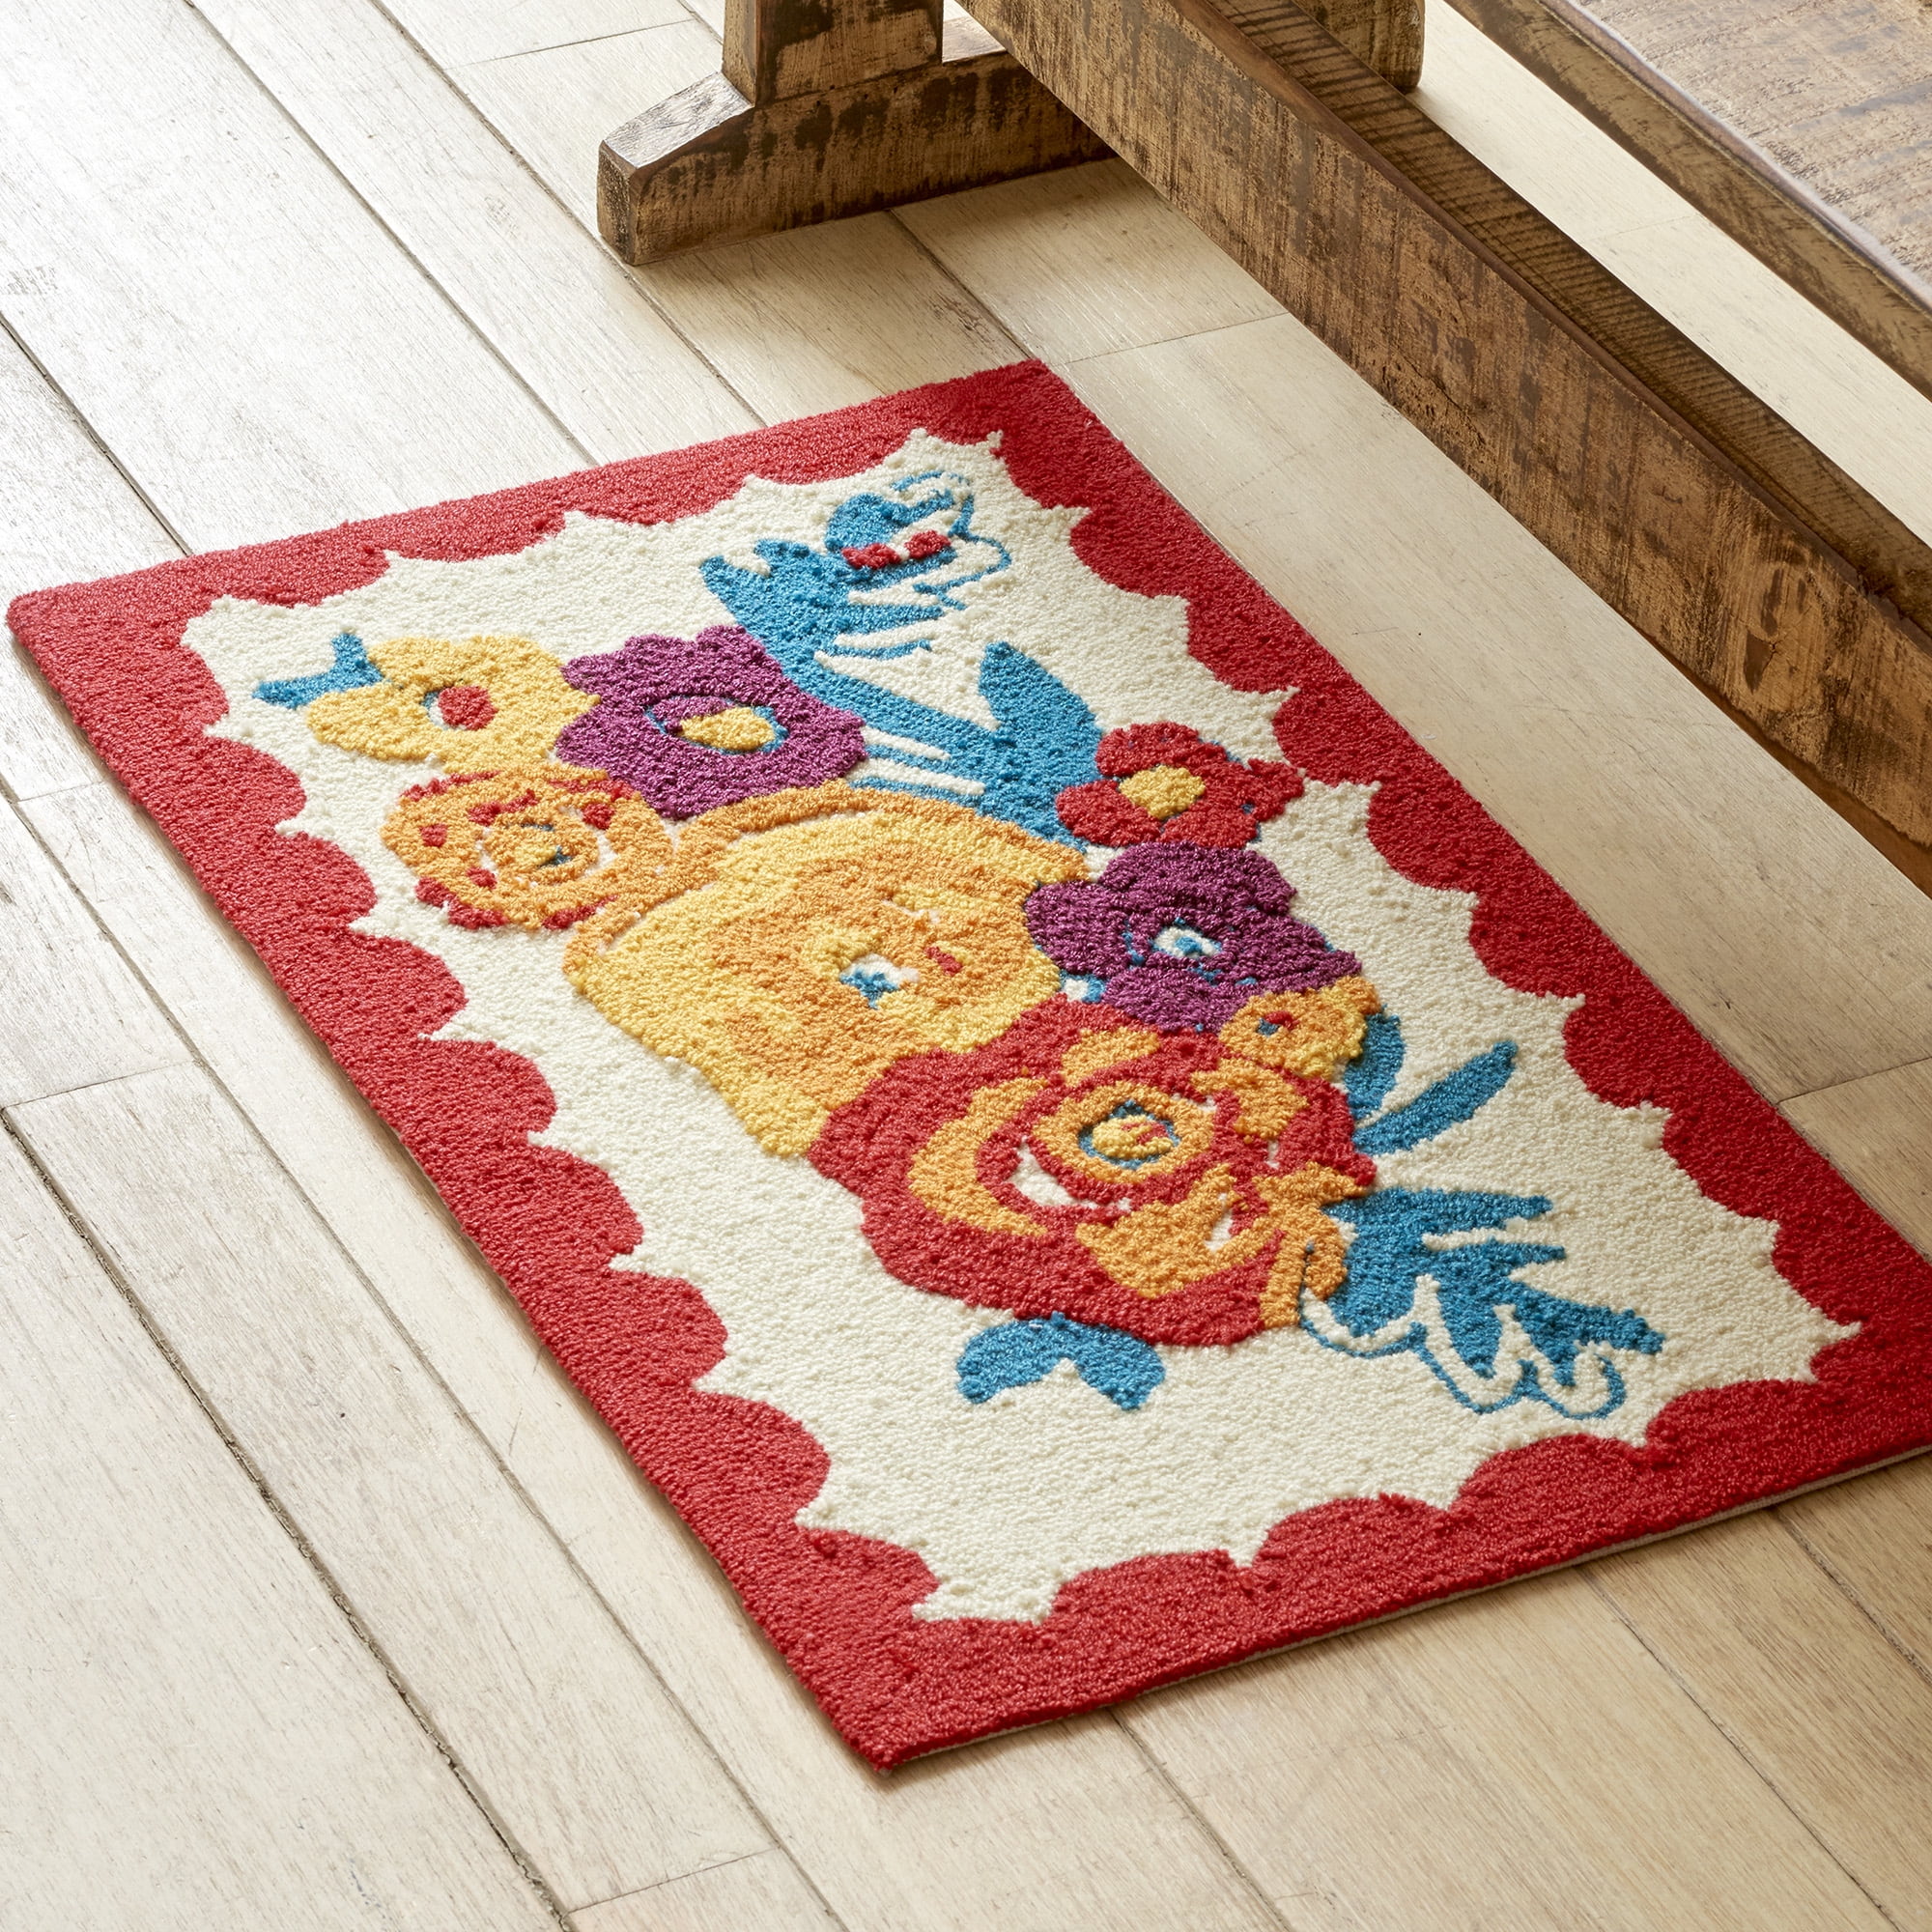 Multicolor Caroline/'s Treasures LH9462RUG Brussels Griffon Wipe Your Paws Machine Washable Memory Foam Mat 19 X 27 Carolines Treasures LH9462RUG Brussels Griffon Wipe Your Paws Machine Washable Memory Foam Mat